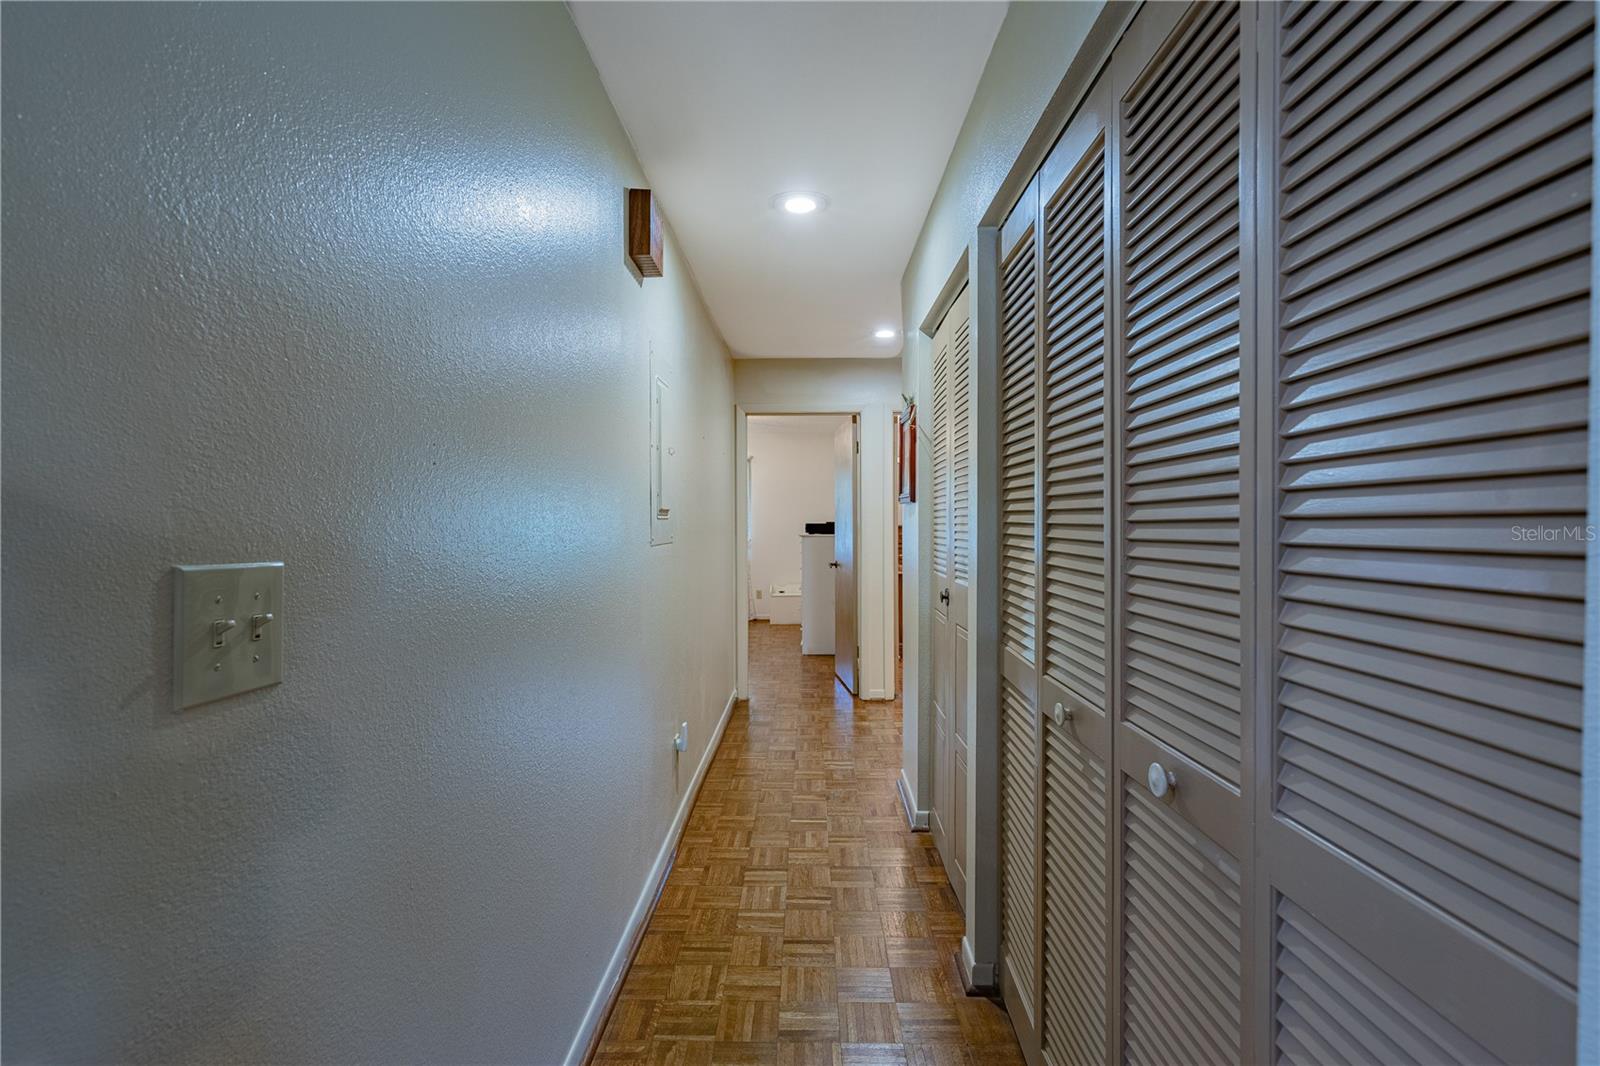 Hallway to guest bath and bedrooms.  Laundry closet doors are also shown here.